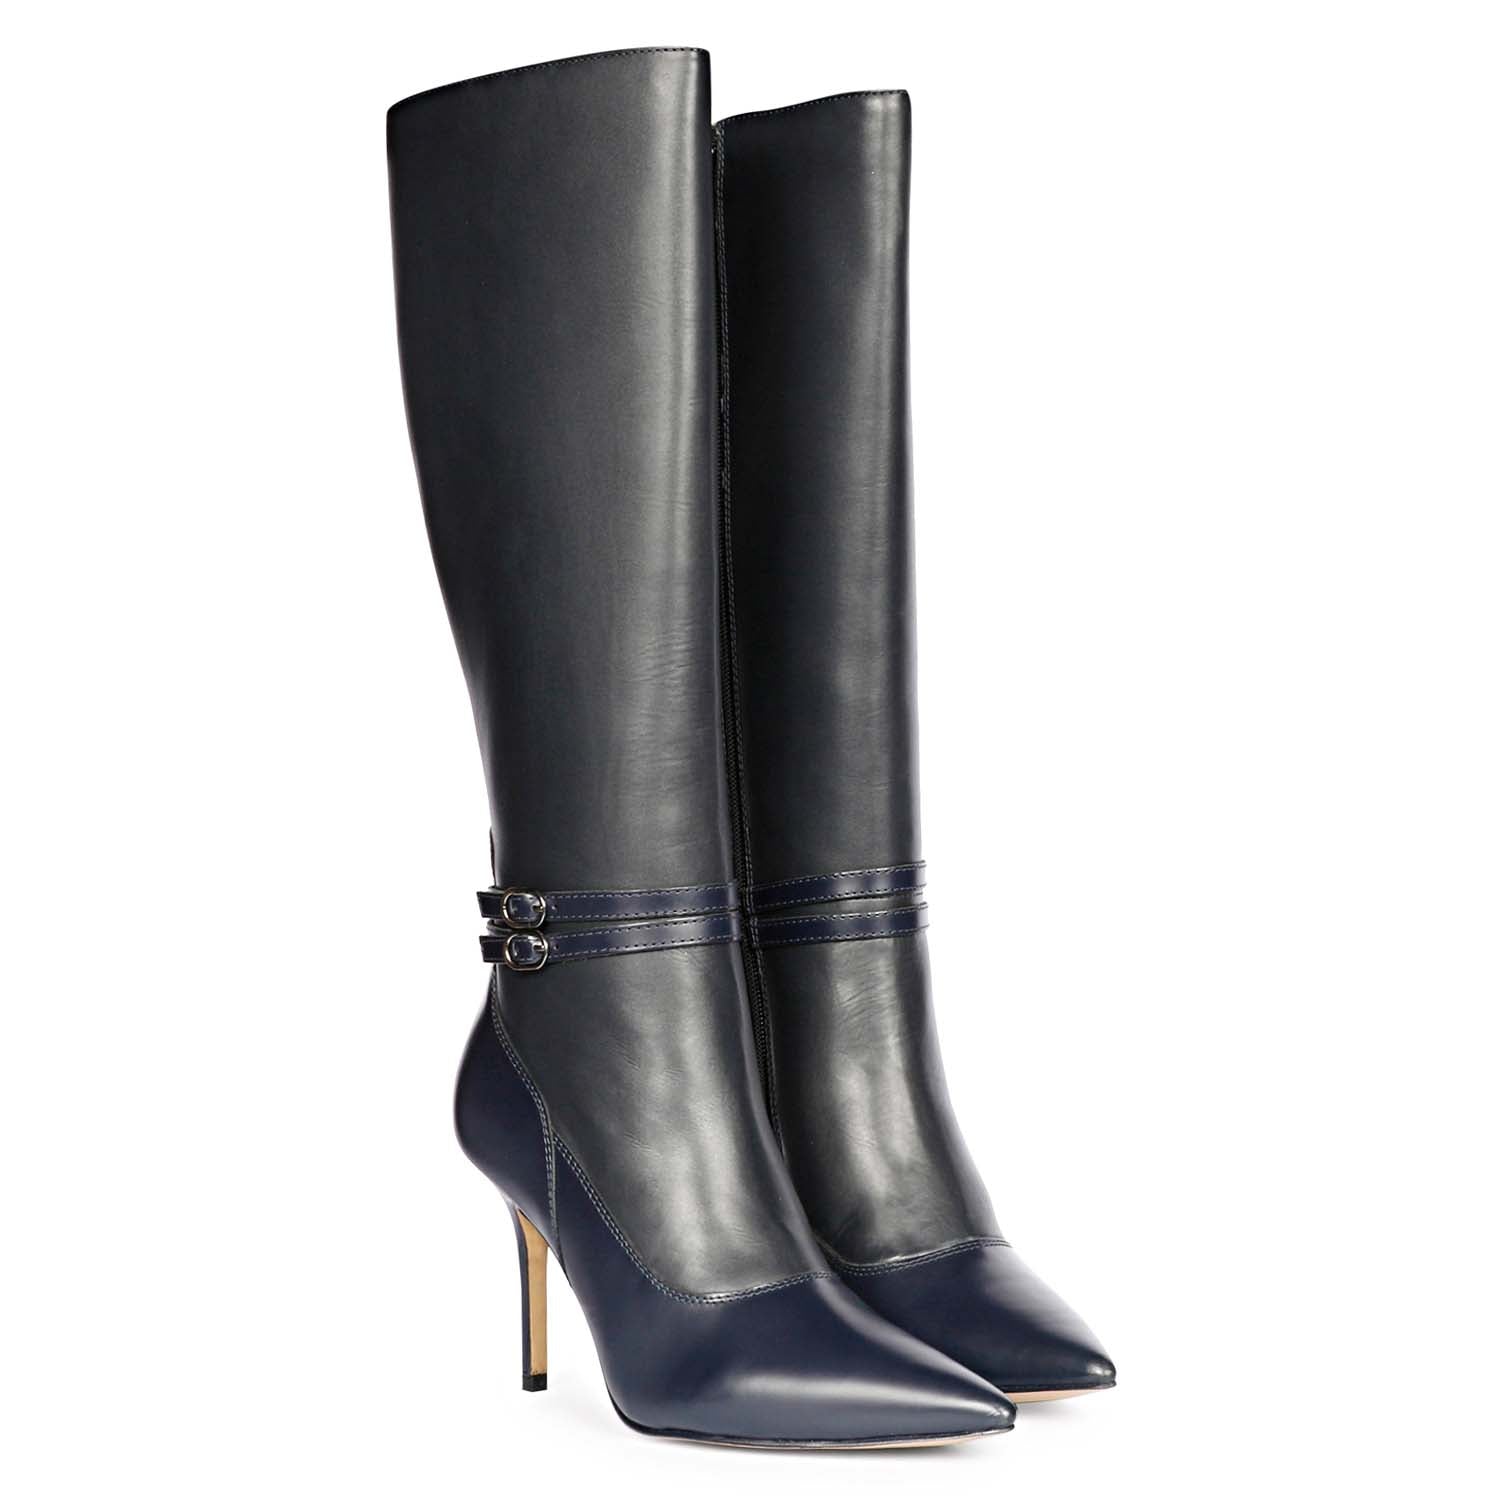 Womens Knee High Boots | Long Boots | Gabor Shoes